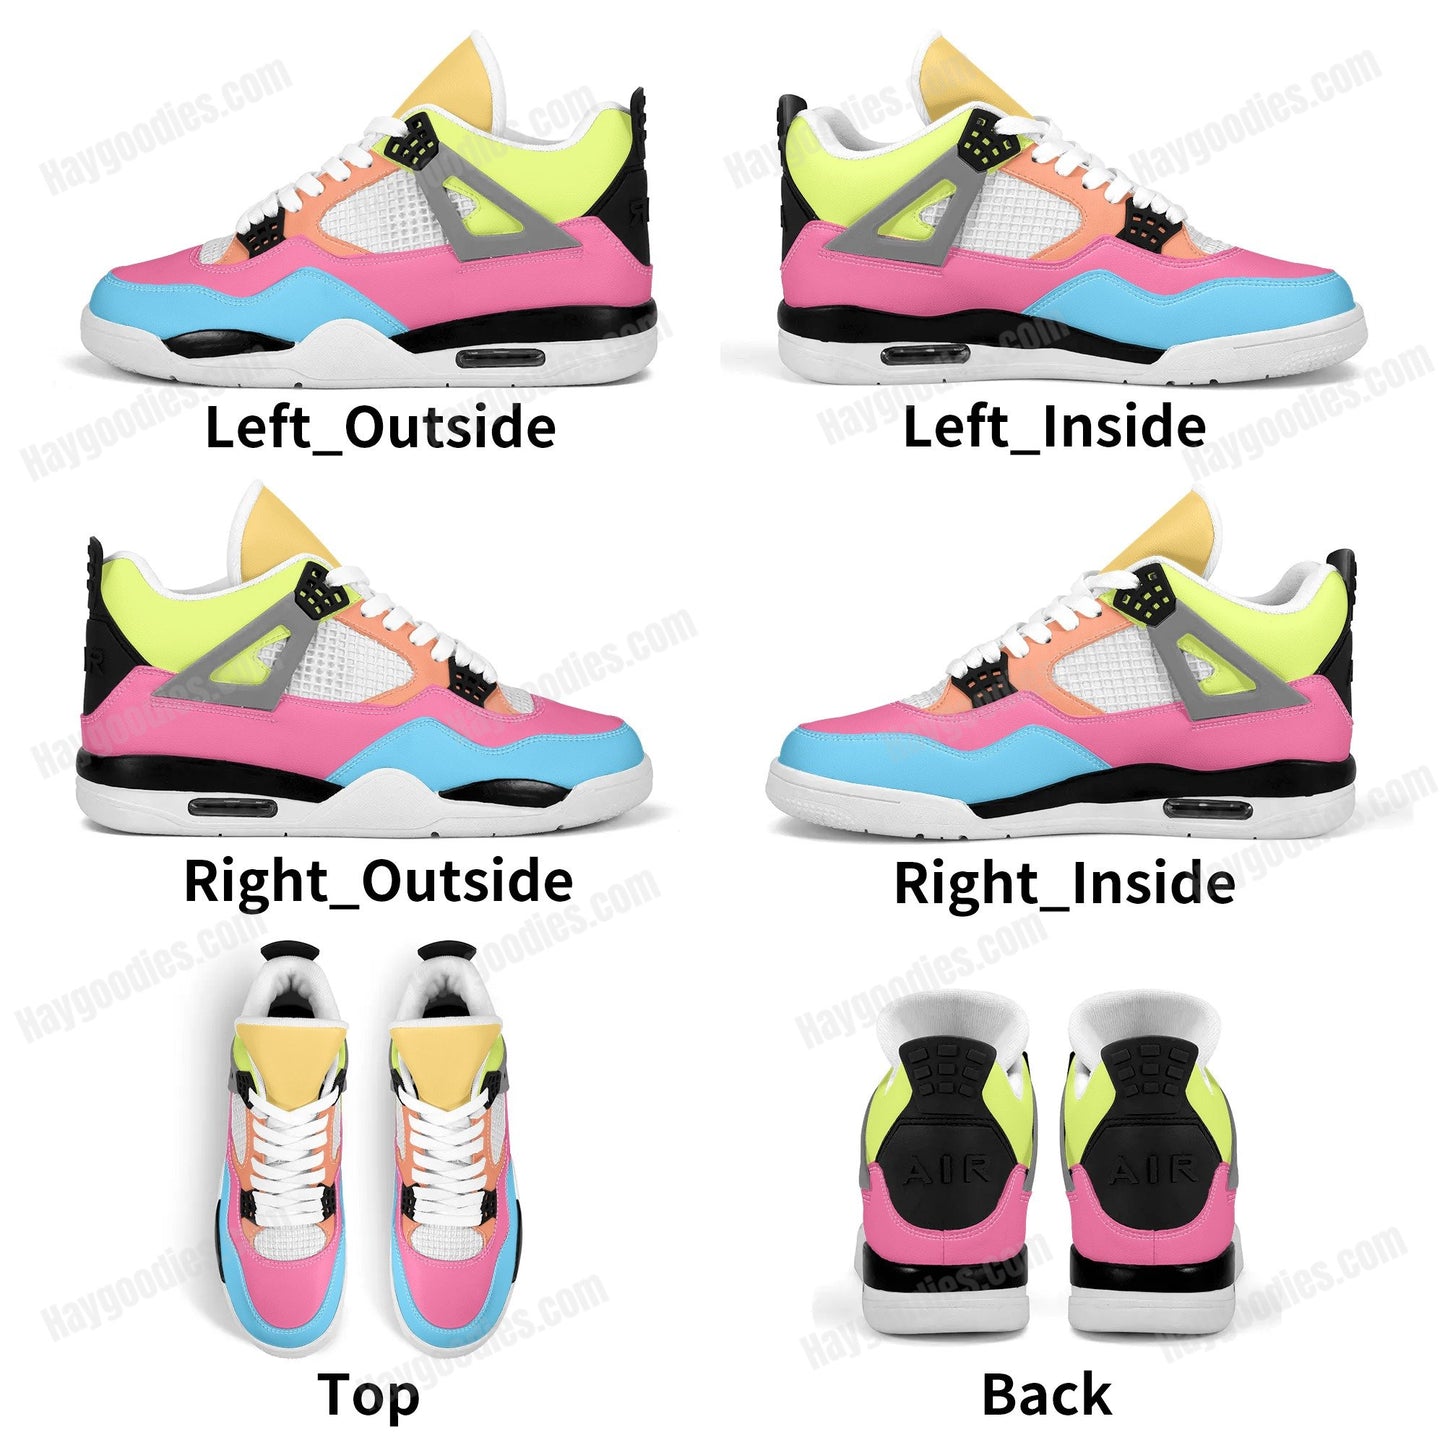 Cute Bright Retro Low Top J4 Style Sneakers